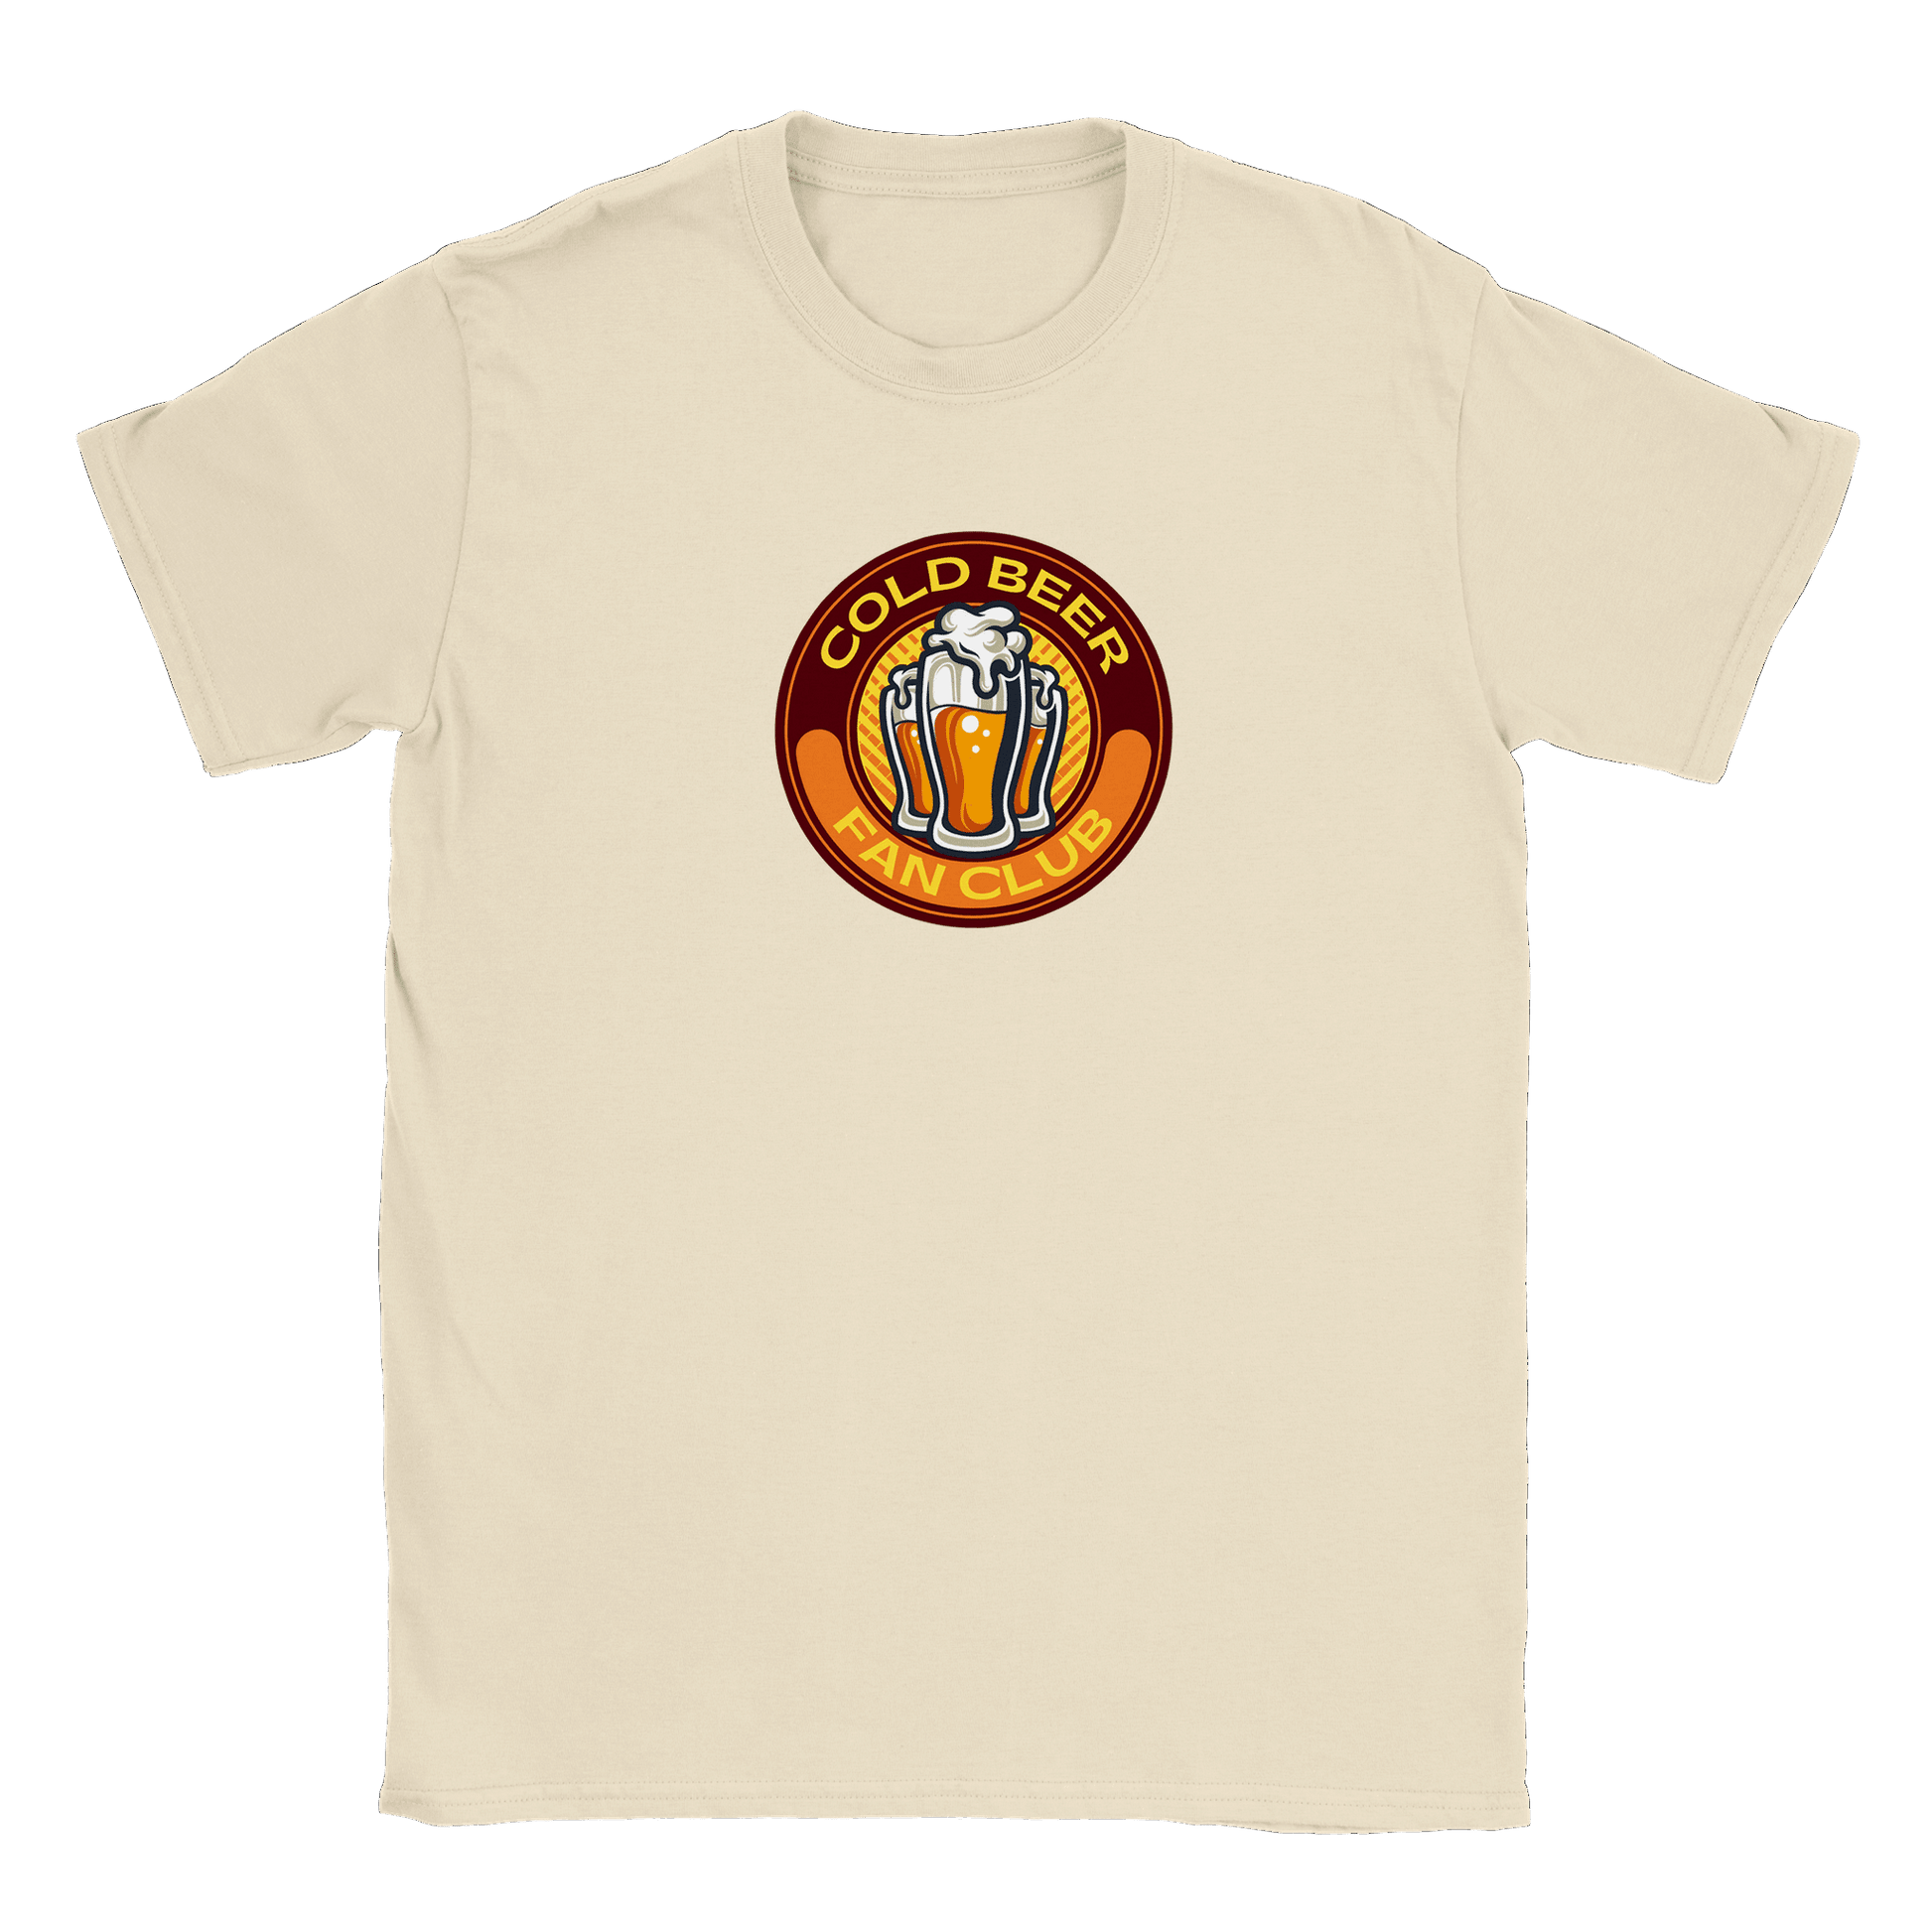 Cold Beer Fan Club - T-shirt Natural